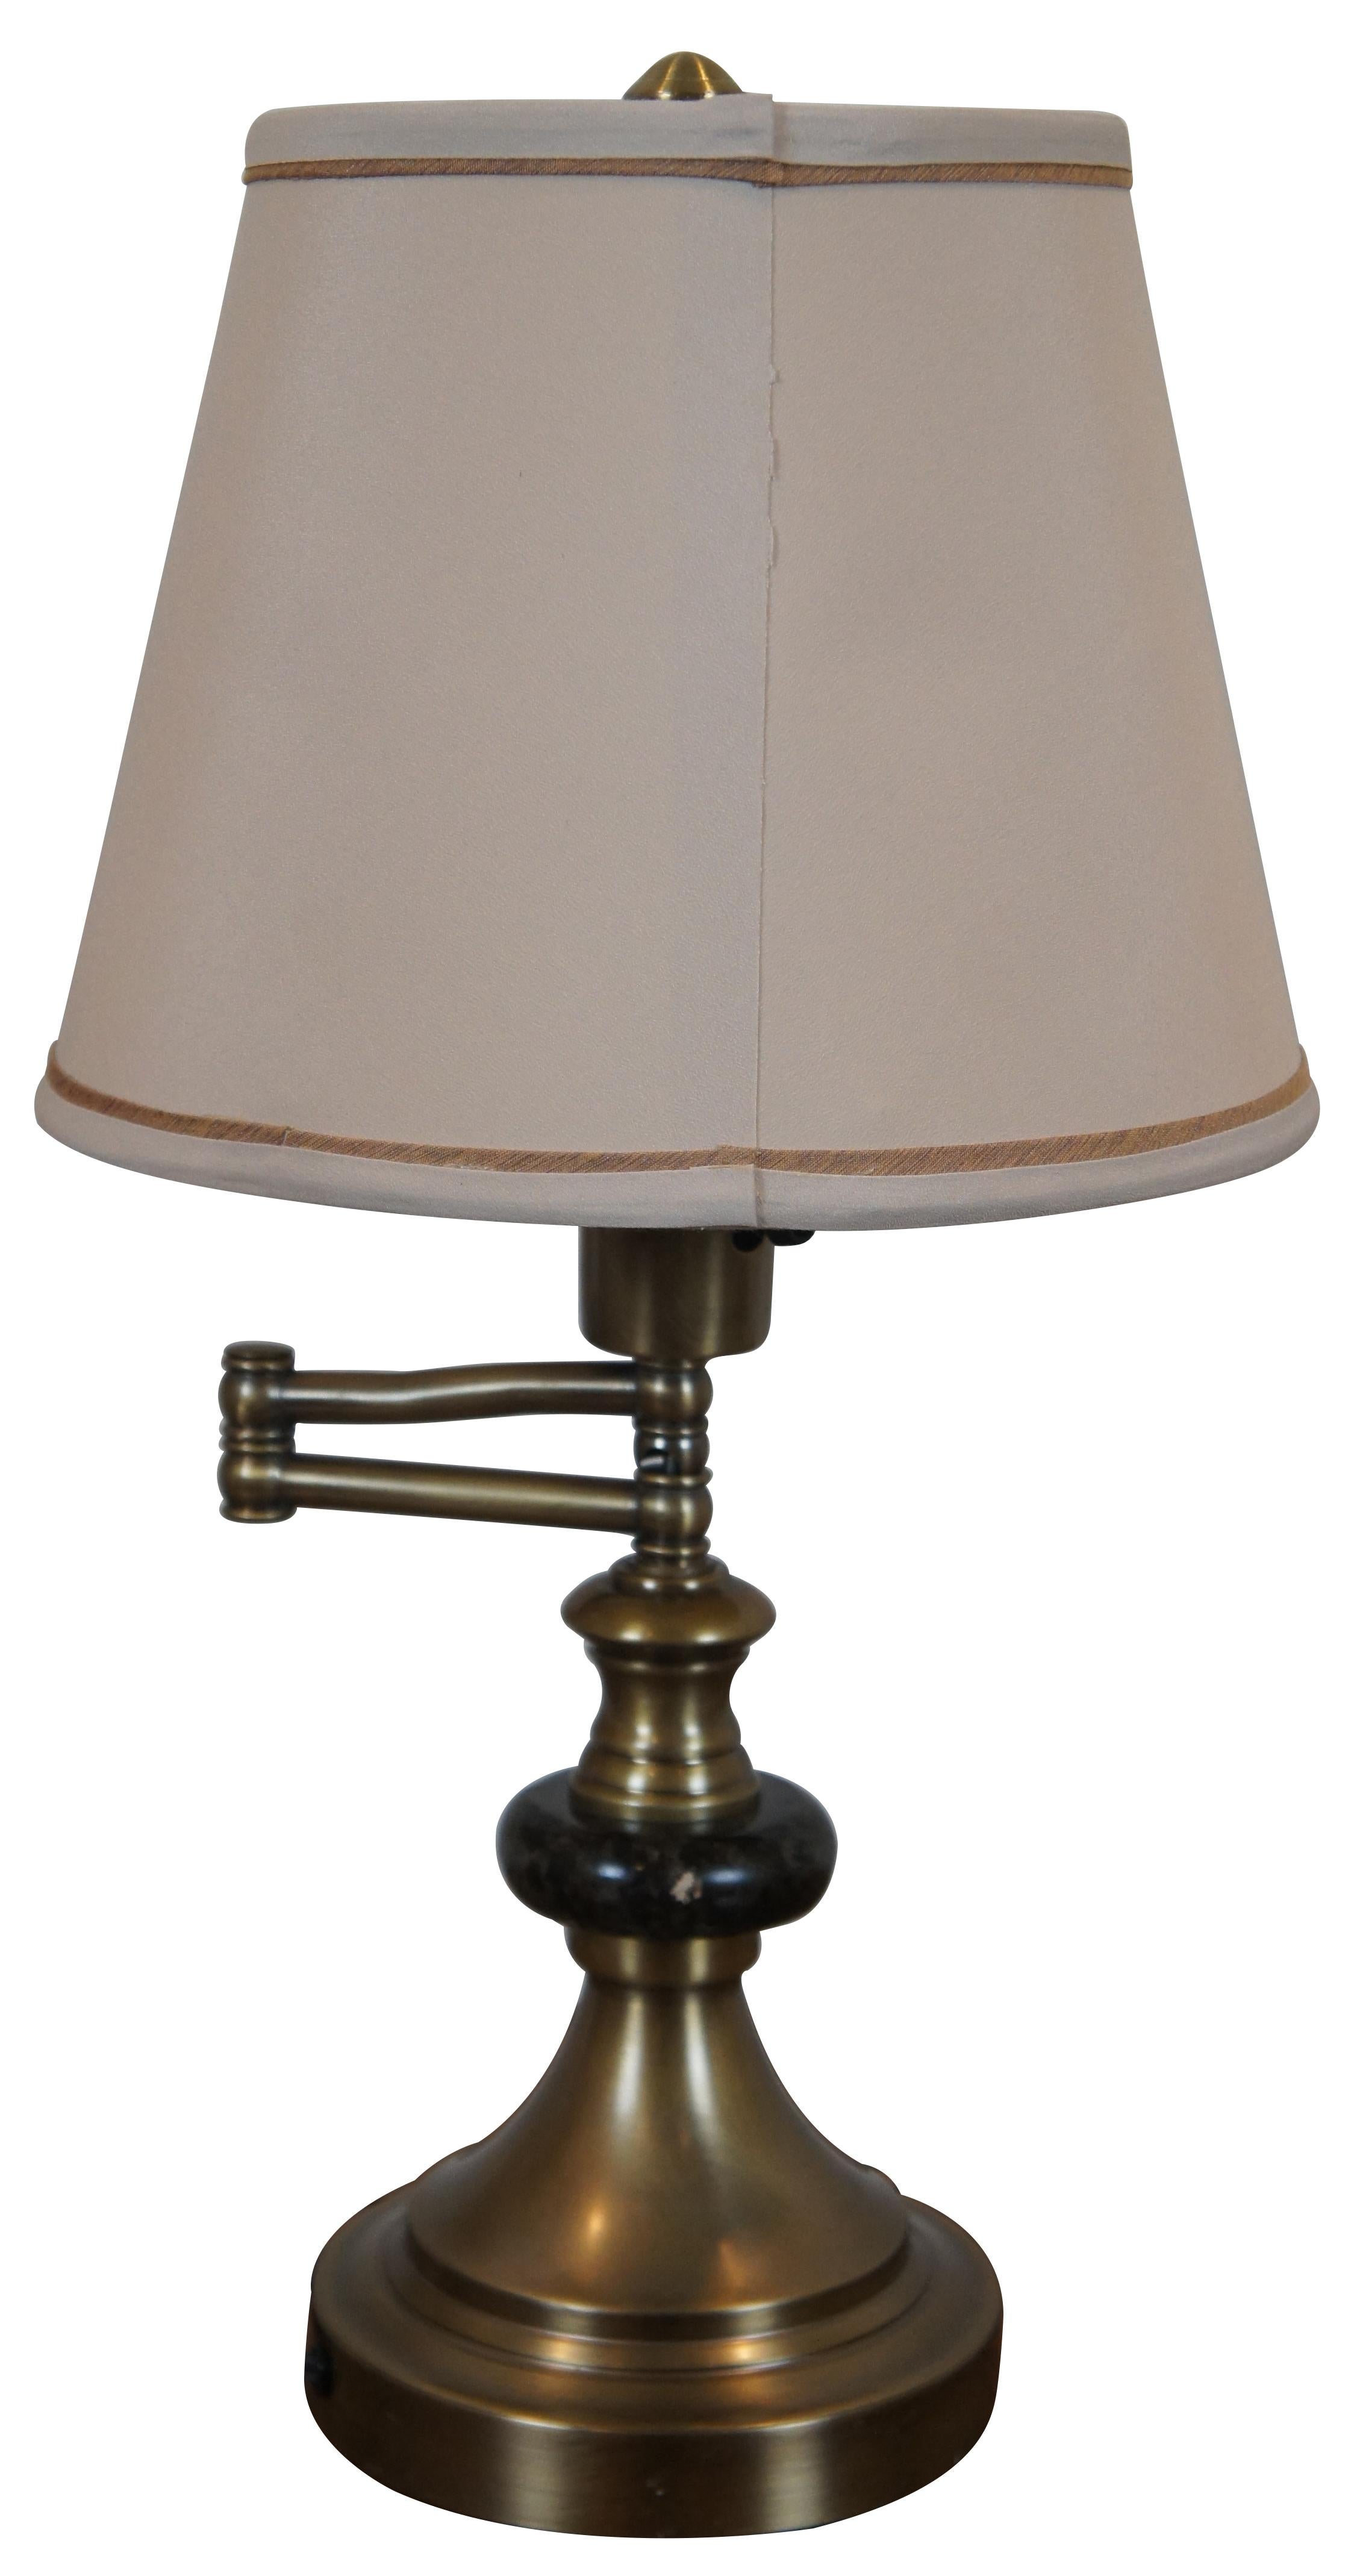 Pair of vintage brass and faux marble swing arm table lamp with off white shades, imported for Fred Meyer.

6.25” x 20.5” / Shade - 11.25” x 8.5” / Width with Arm Extended – 11” (Diameter x Height)